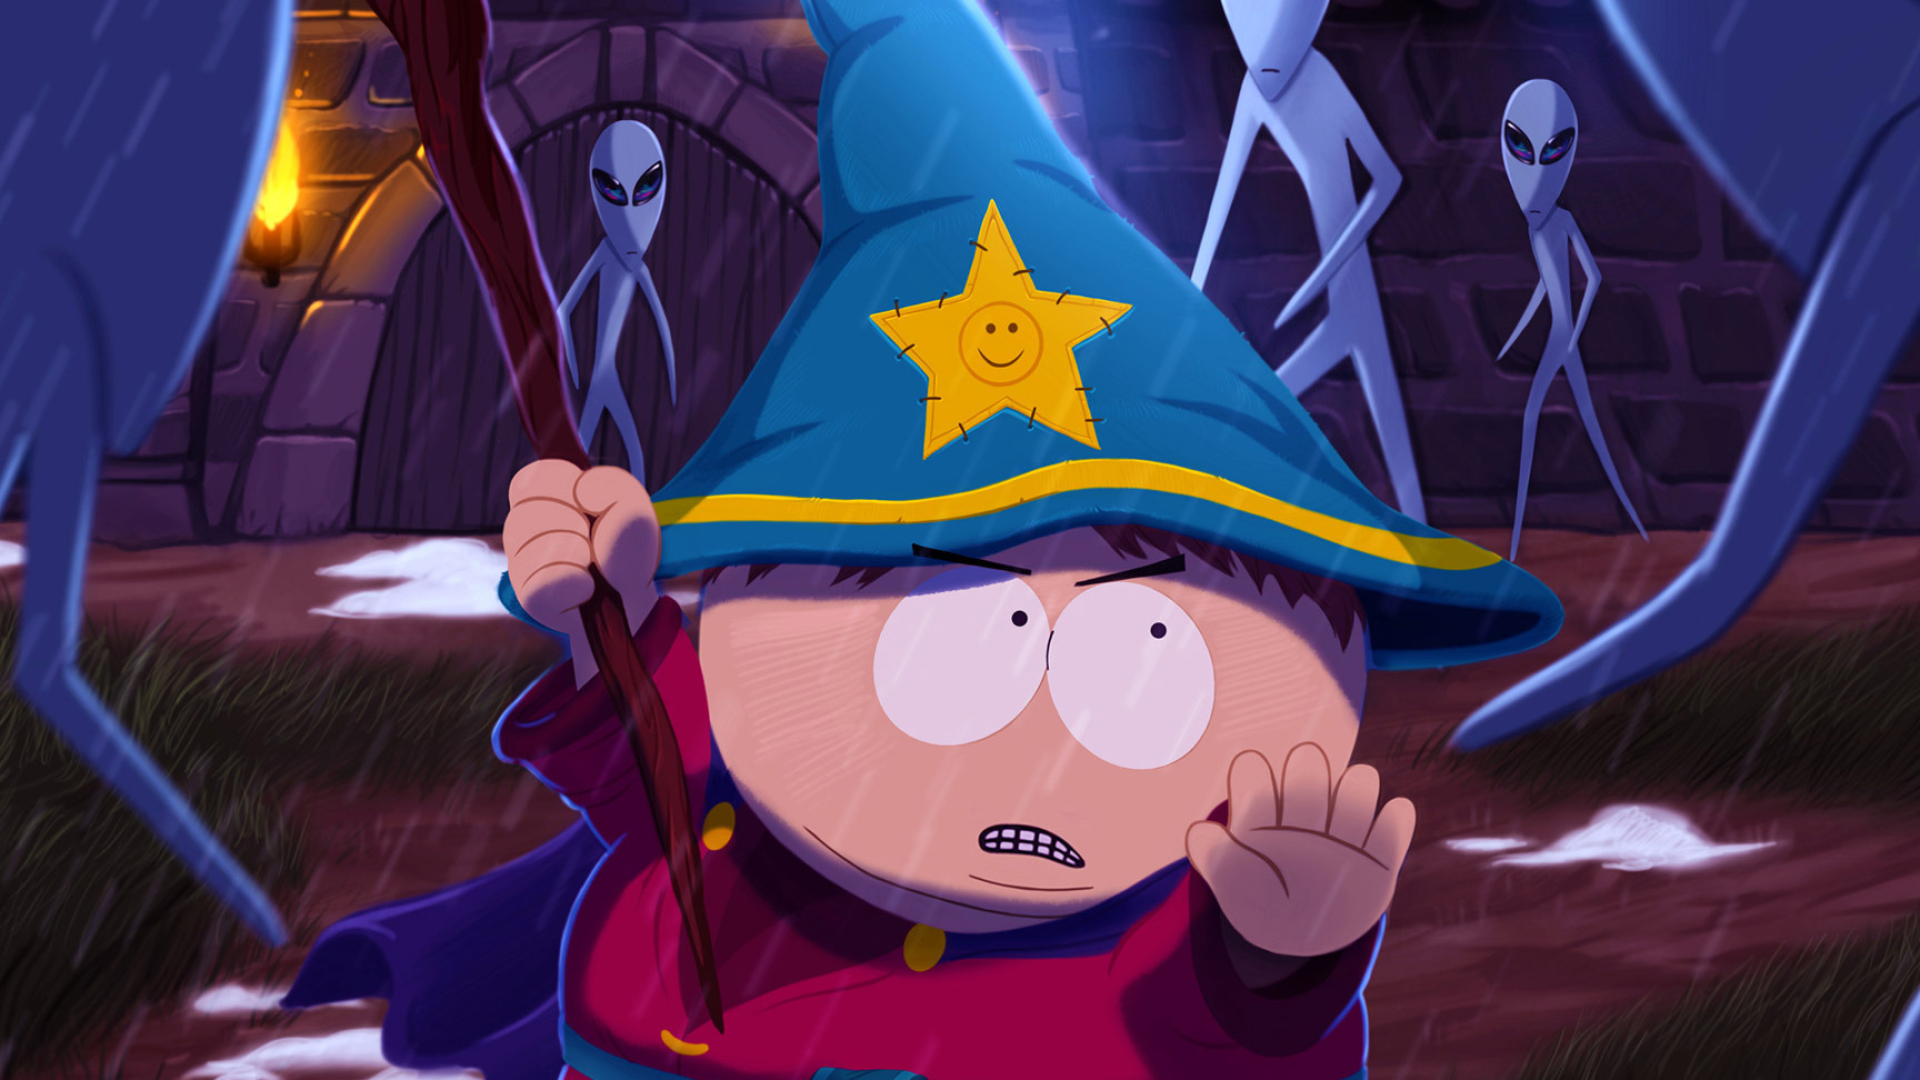 Cartman South Park, The Stick of Truth wallpaper, Game wallpapers, Classic character, 1920x1080 Full HD Desktop